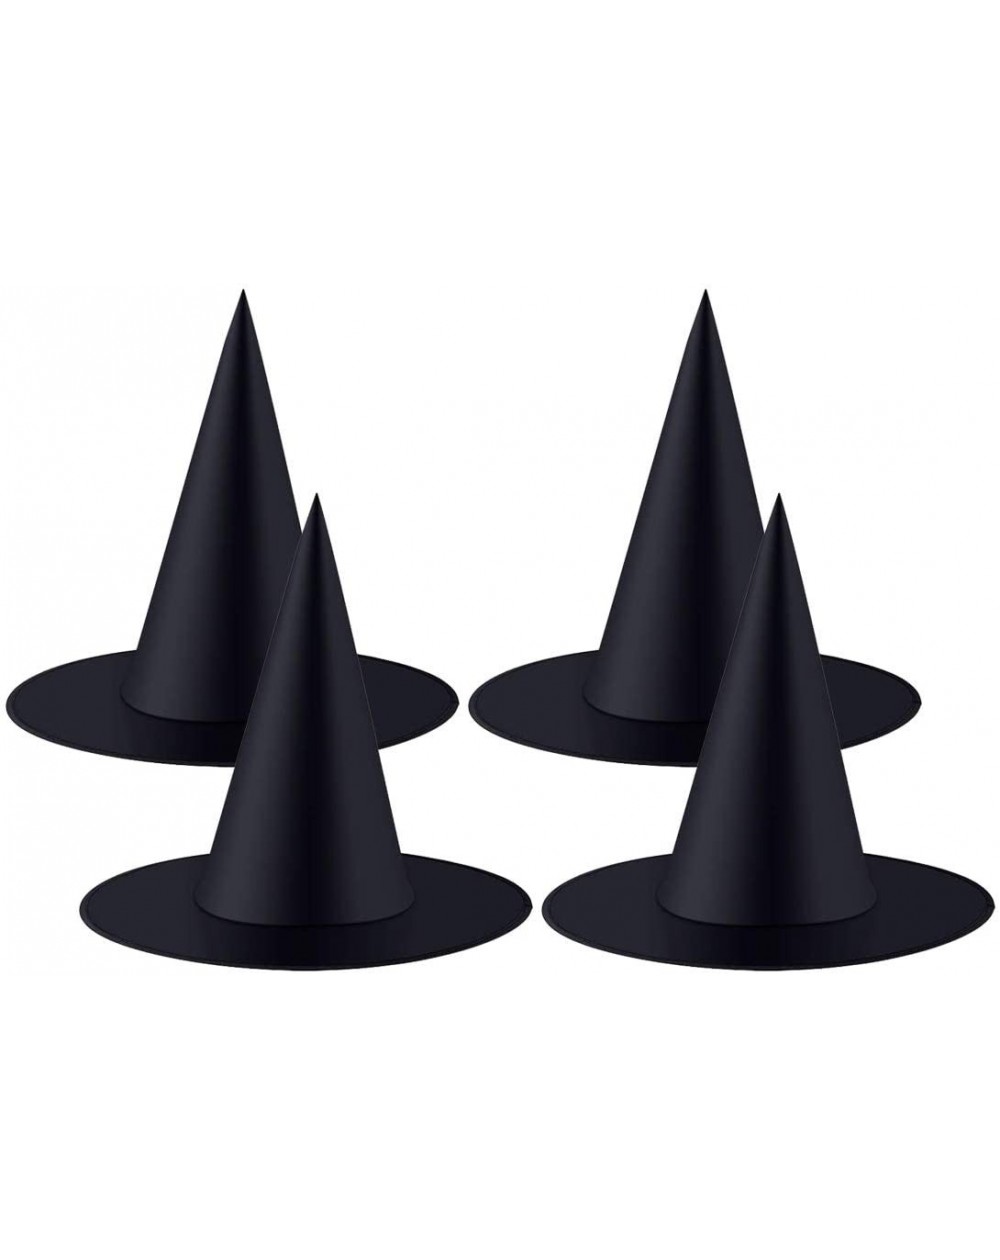 Party Hats 4 Pieces Halloween Witch Hat Costume Accessory for Halloween Christmas Party- Black - CT19EWCSXC9 $27.97